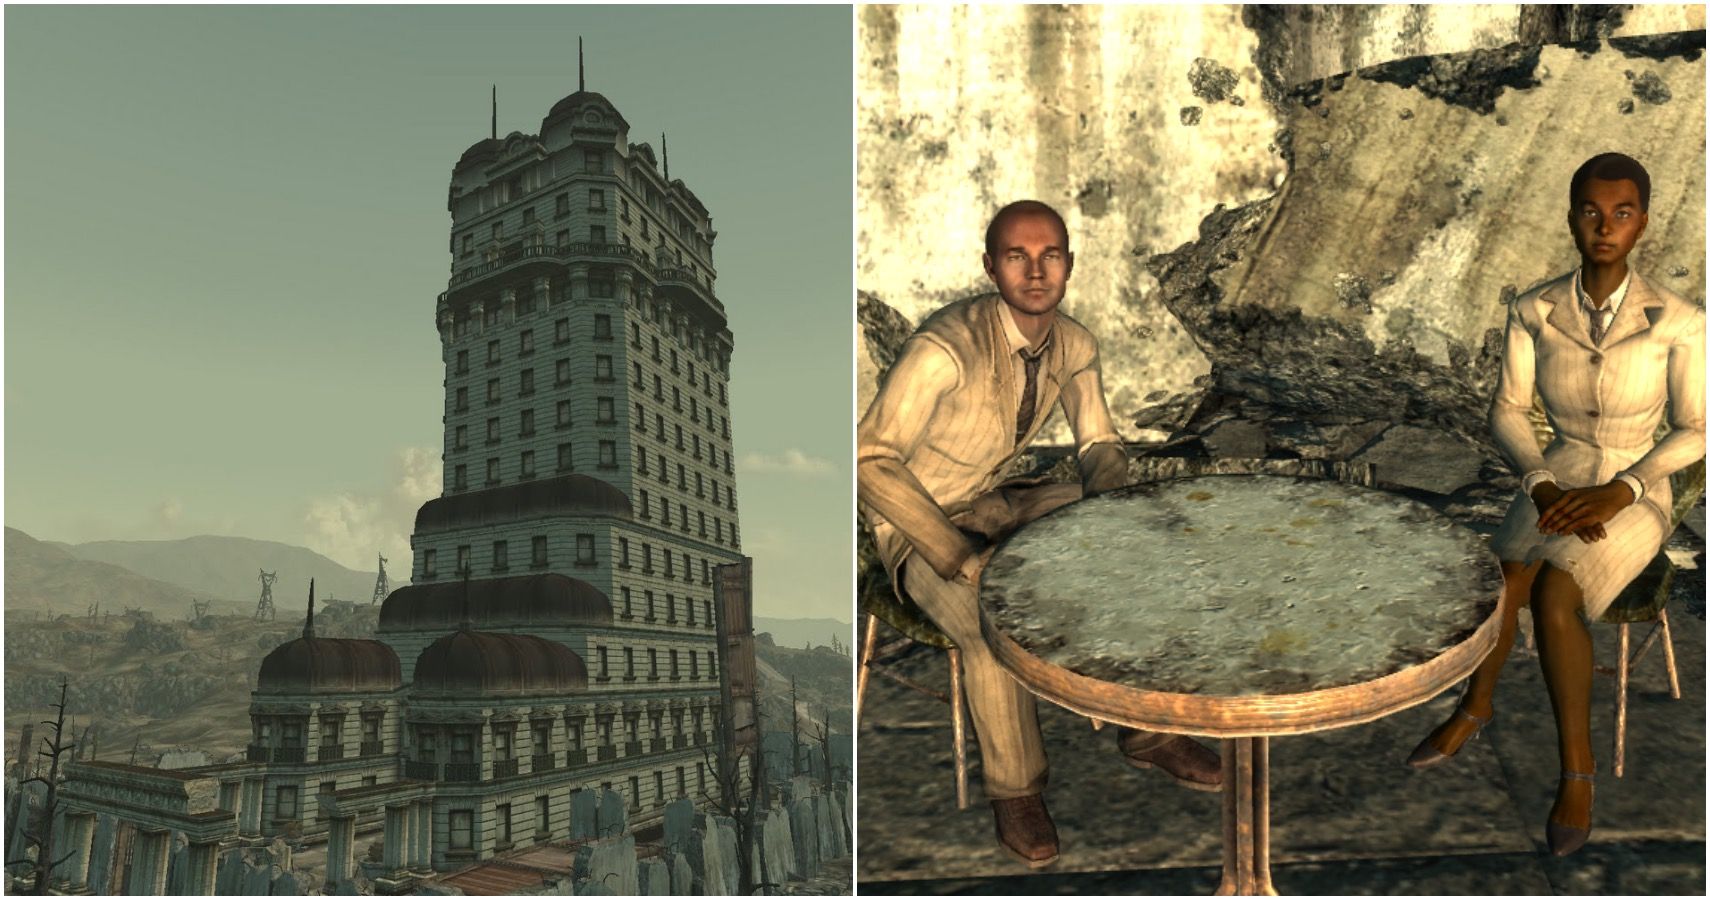 Tenpenny Tower and residents in the courtyard area